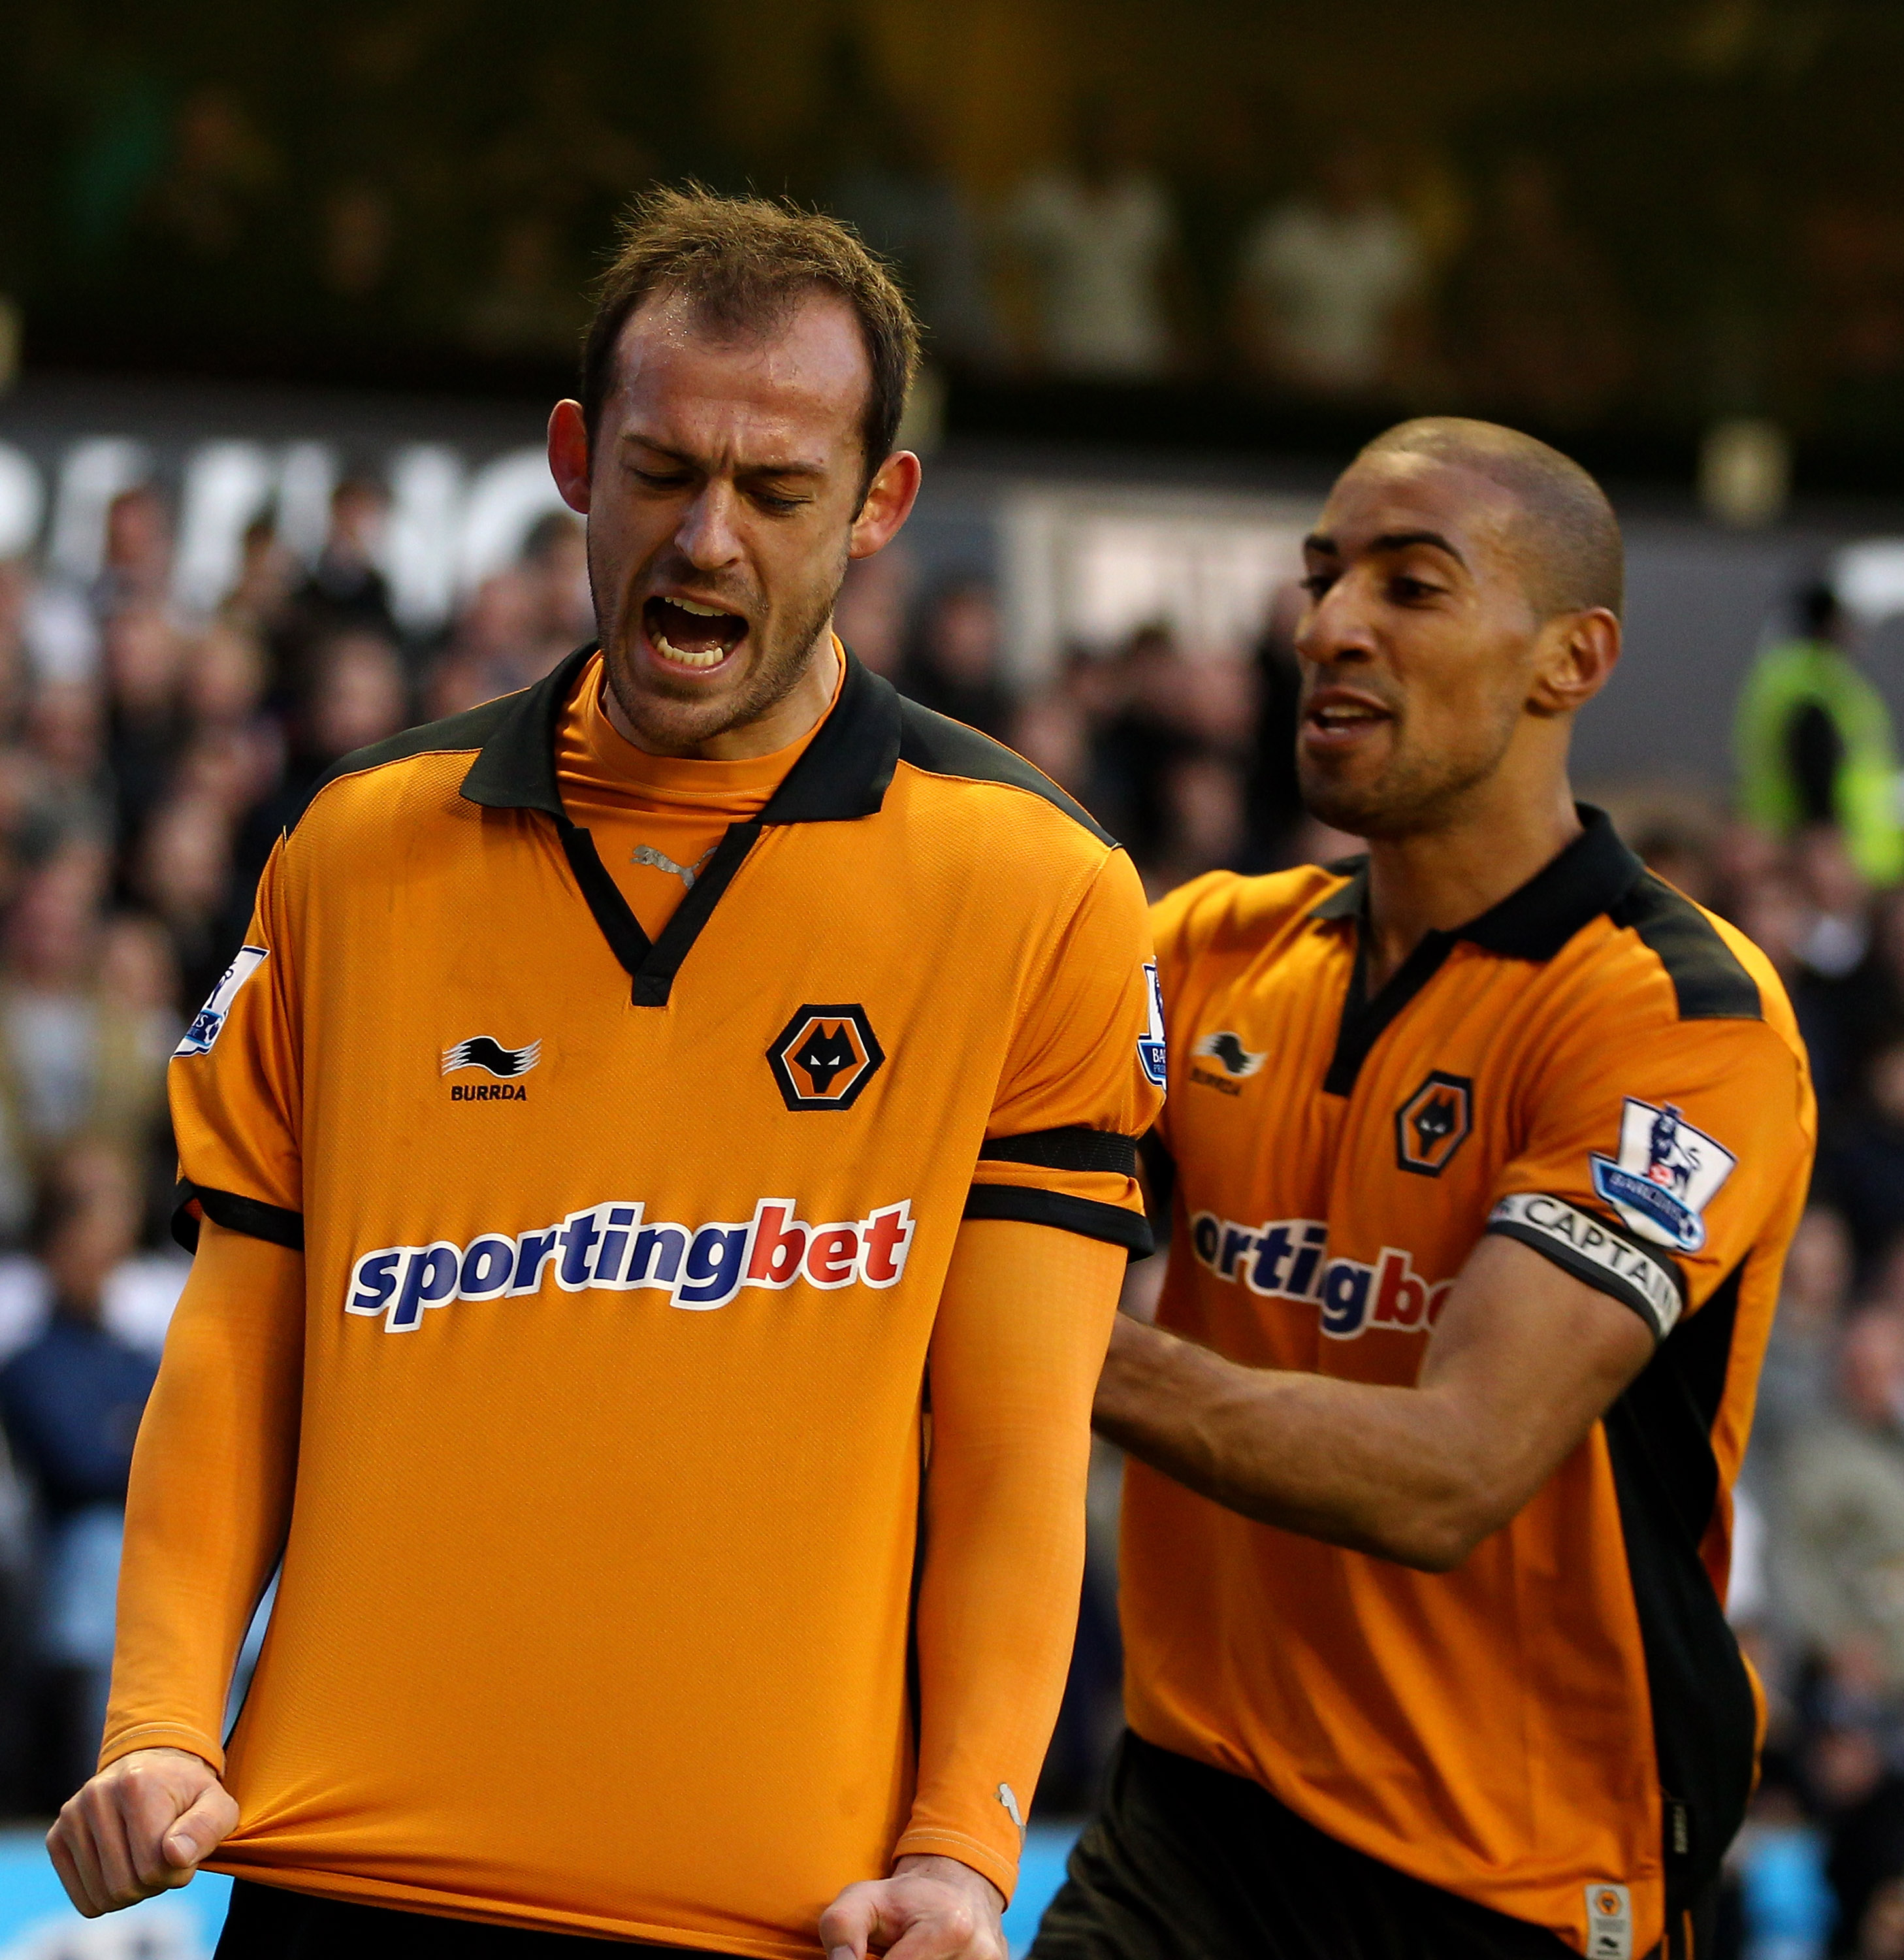 WOLVERHAMPTON, ENGLAND - MARCH 06:  Steven Fletcher (L) of Wolves celebrates scoring the equalising goal with teammate Karl Henry during the Barclays Premier League match between Wolverhampton Wanderers and Tottenham Hotspur at Molineux on March 6, 2011 i